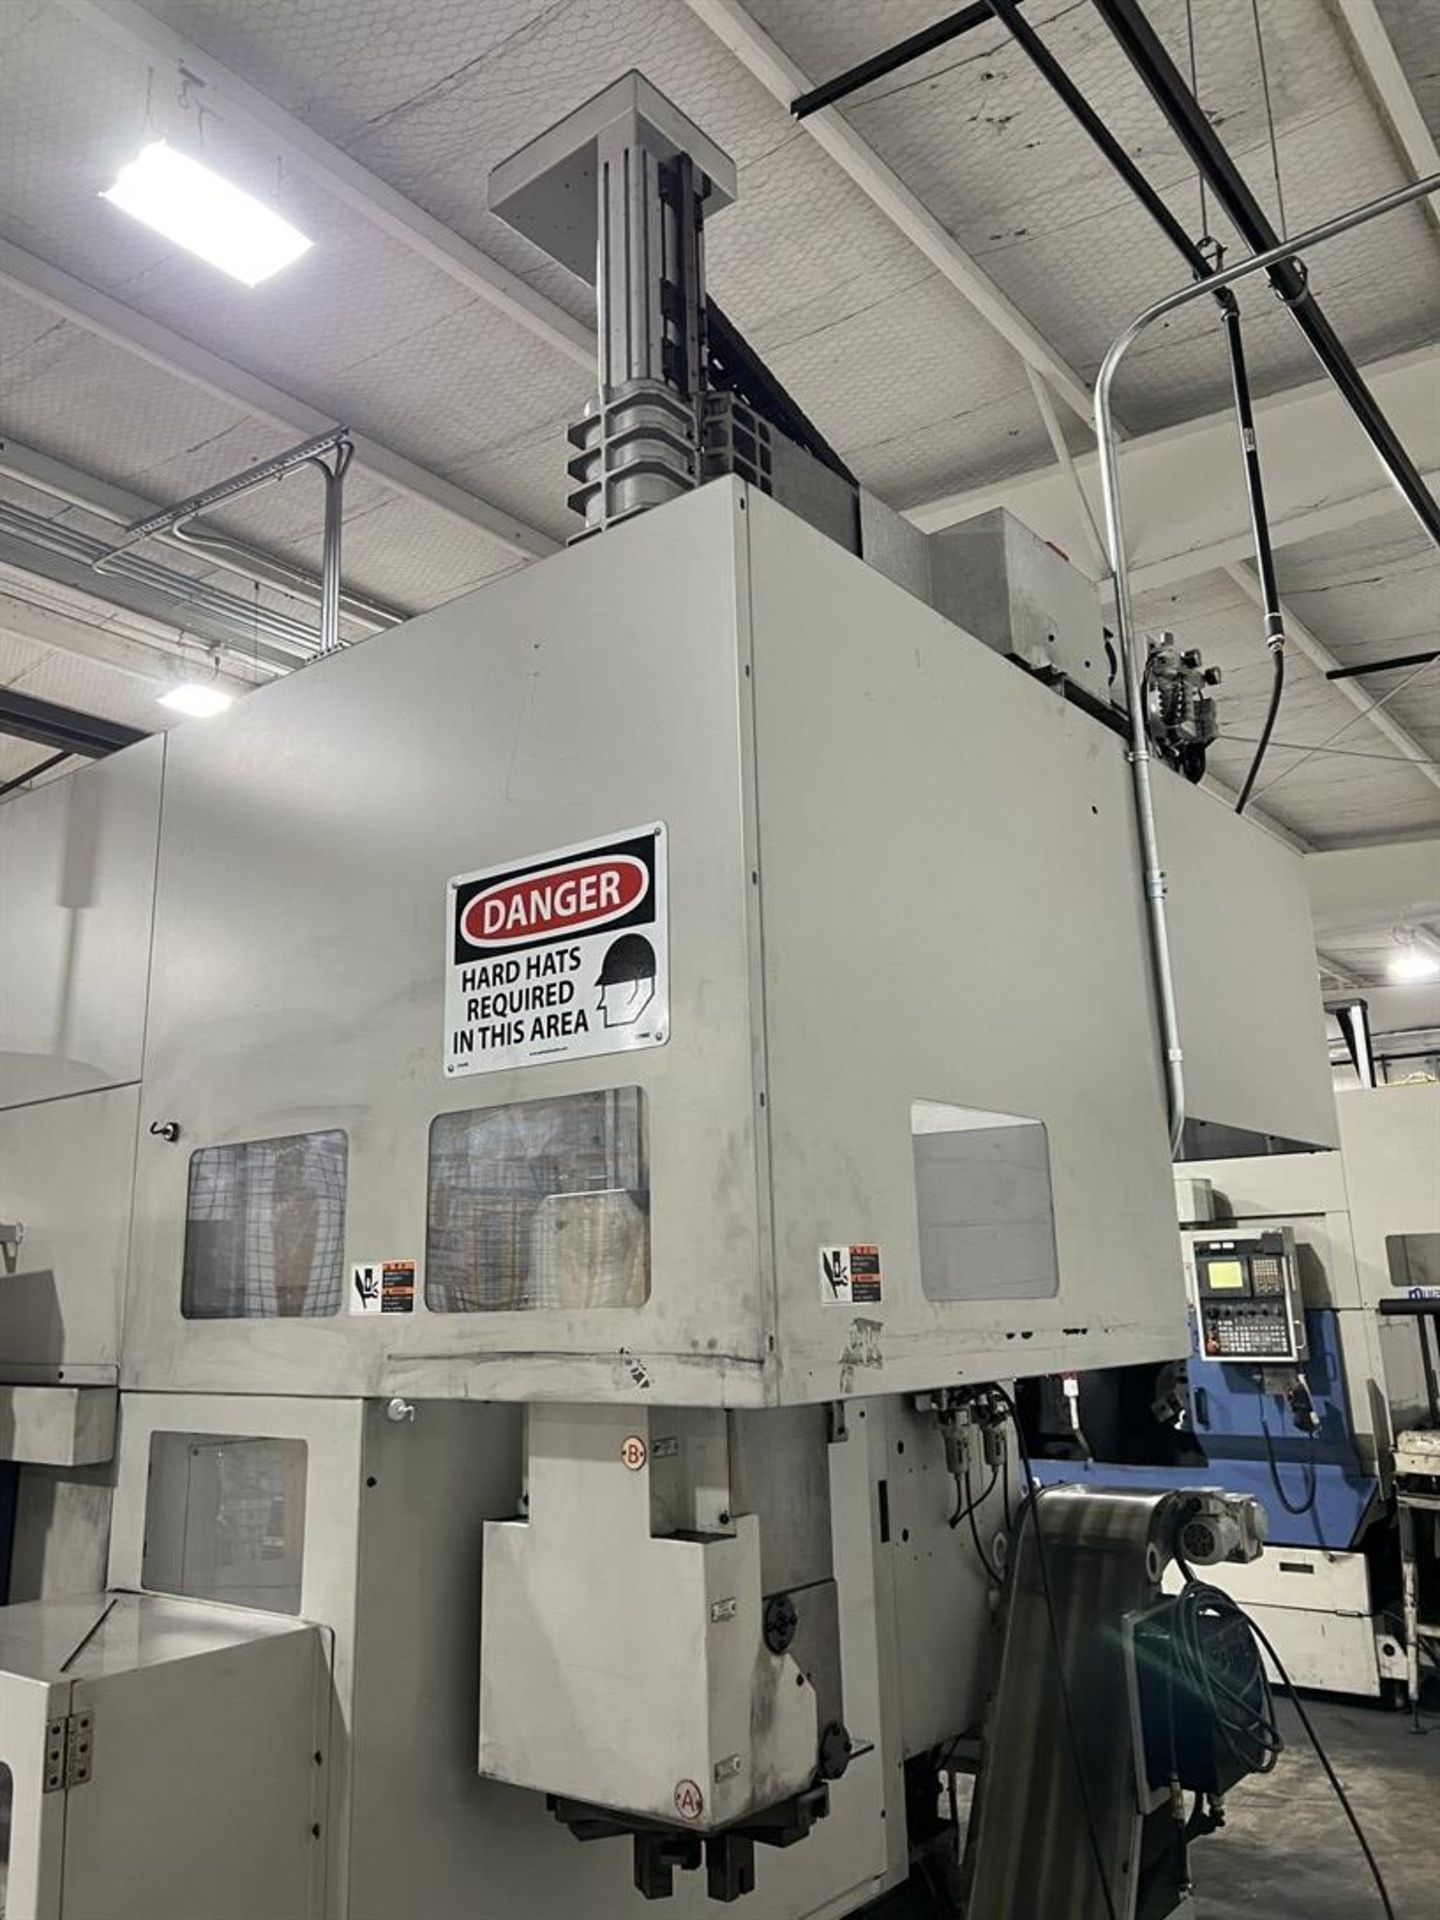 2020 MURATEC MW400 Dual Spindle Turning Center w/ Gantry Loader, s/n 19KX302720001, Muratec-Fanuc - Image 7 of 11